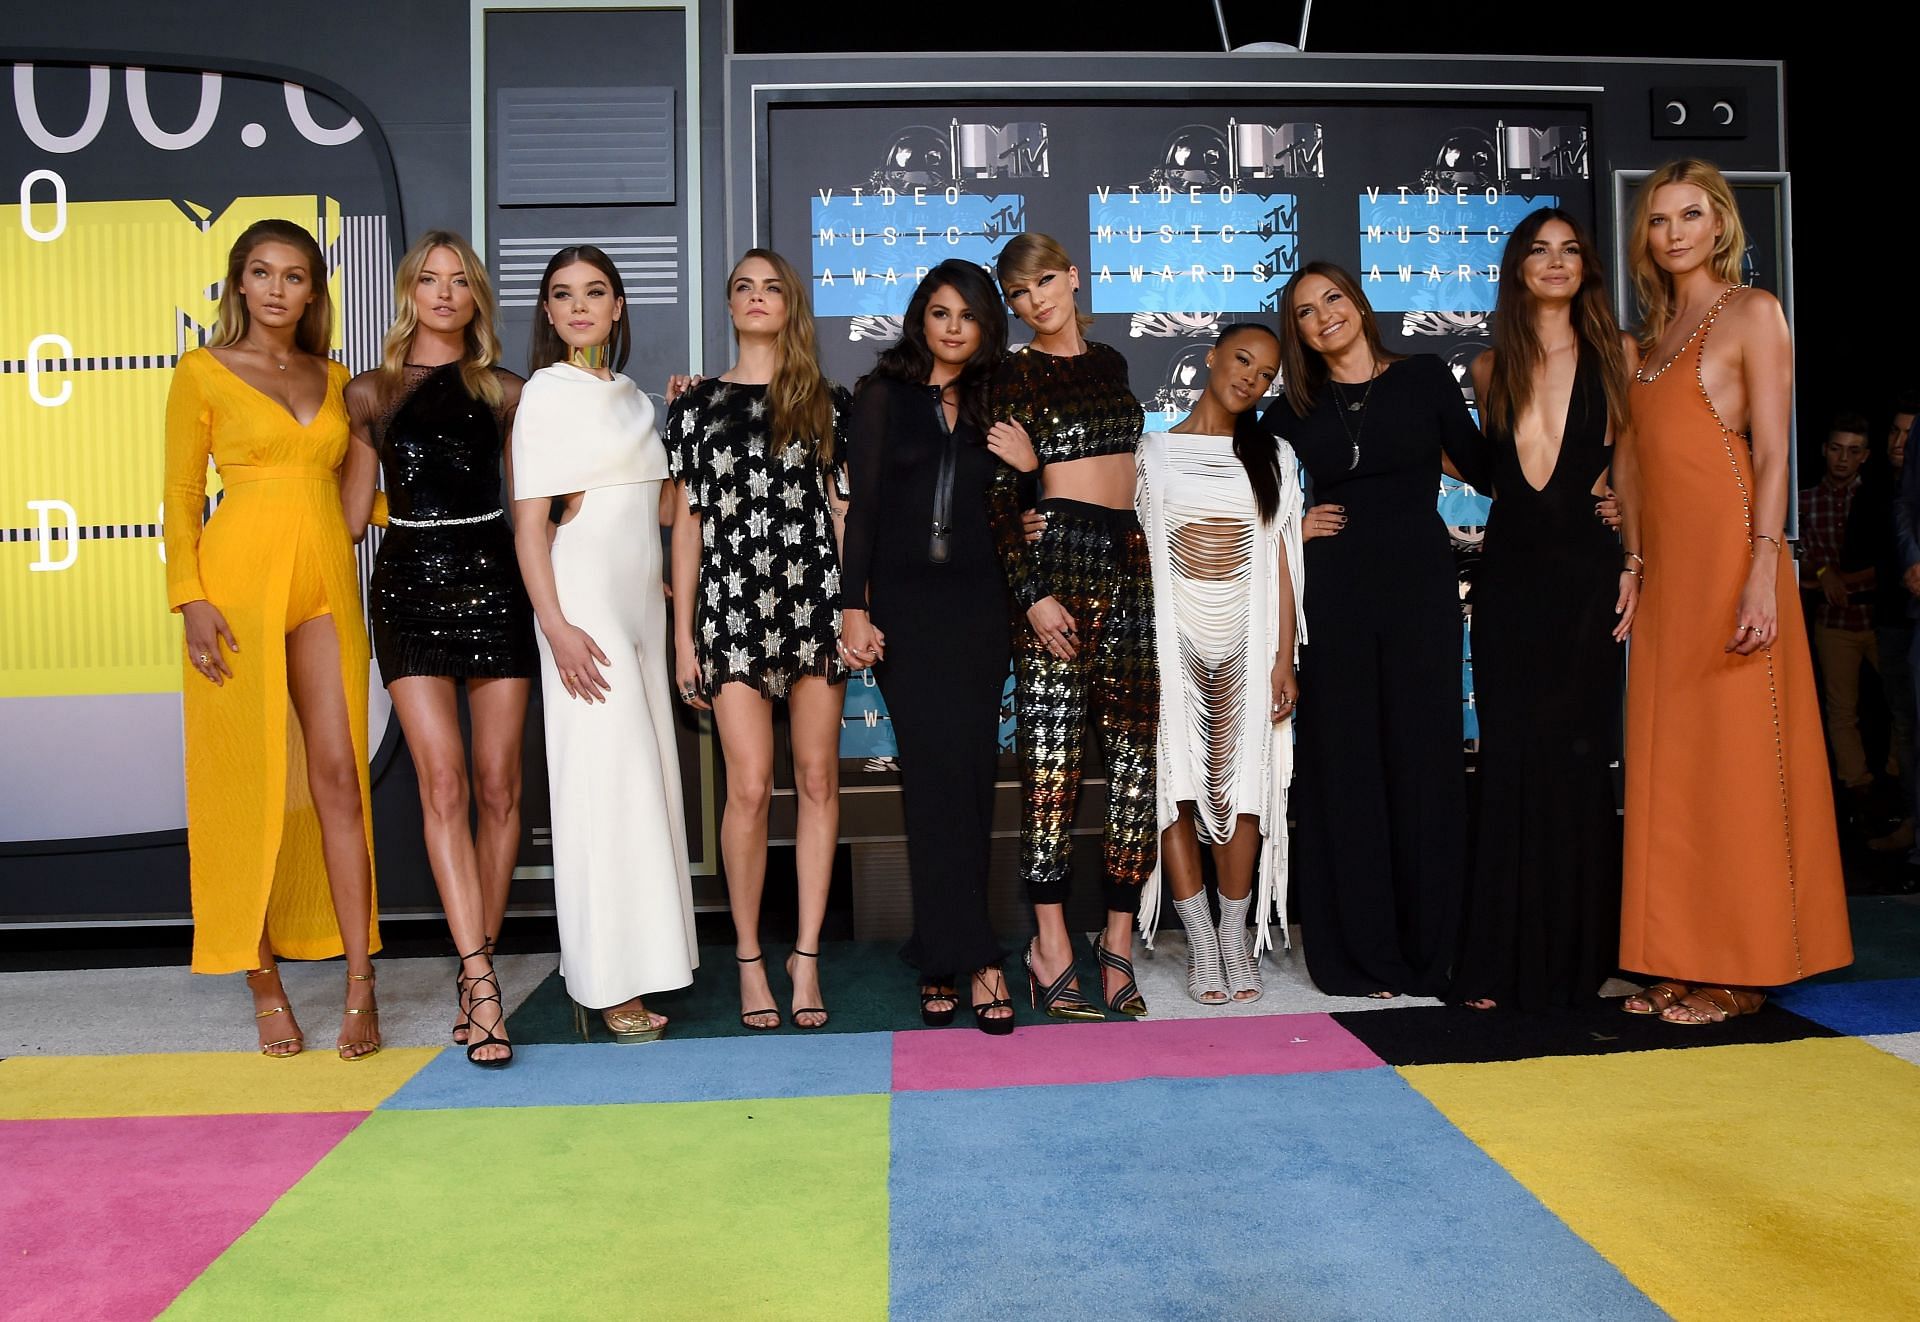 Some of the members from the Bad Blood crew at the 2015 MTV Video Music Awards. (Photo by Larry Busacca/Getty Images)